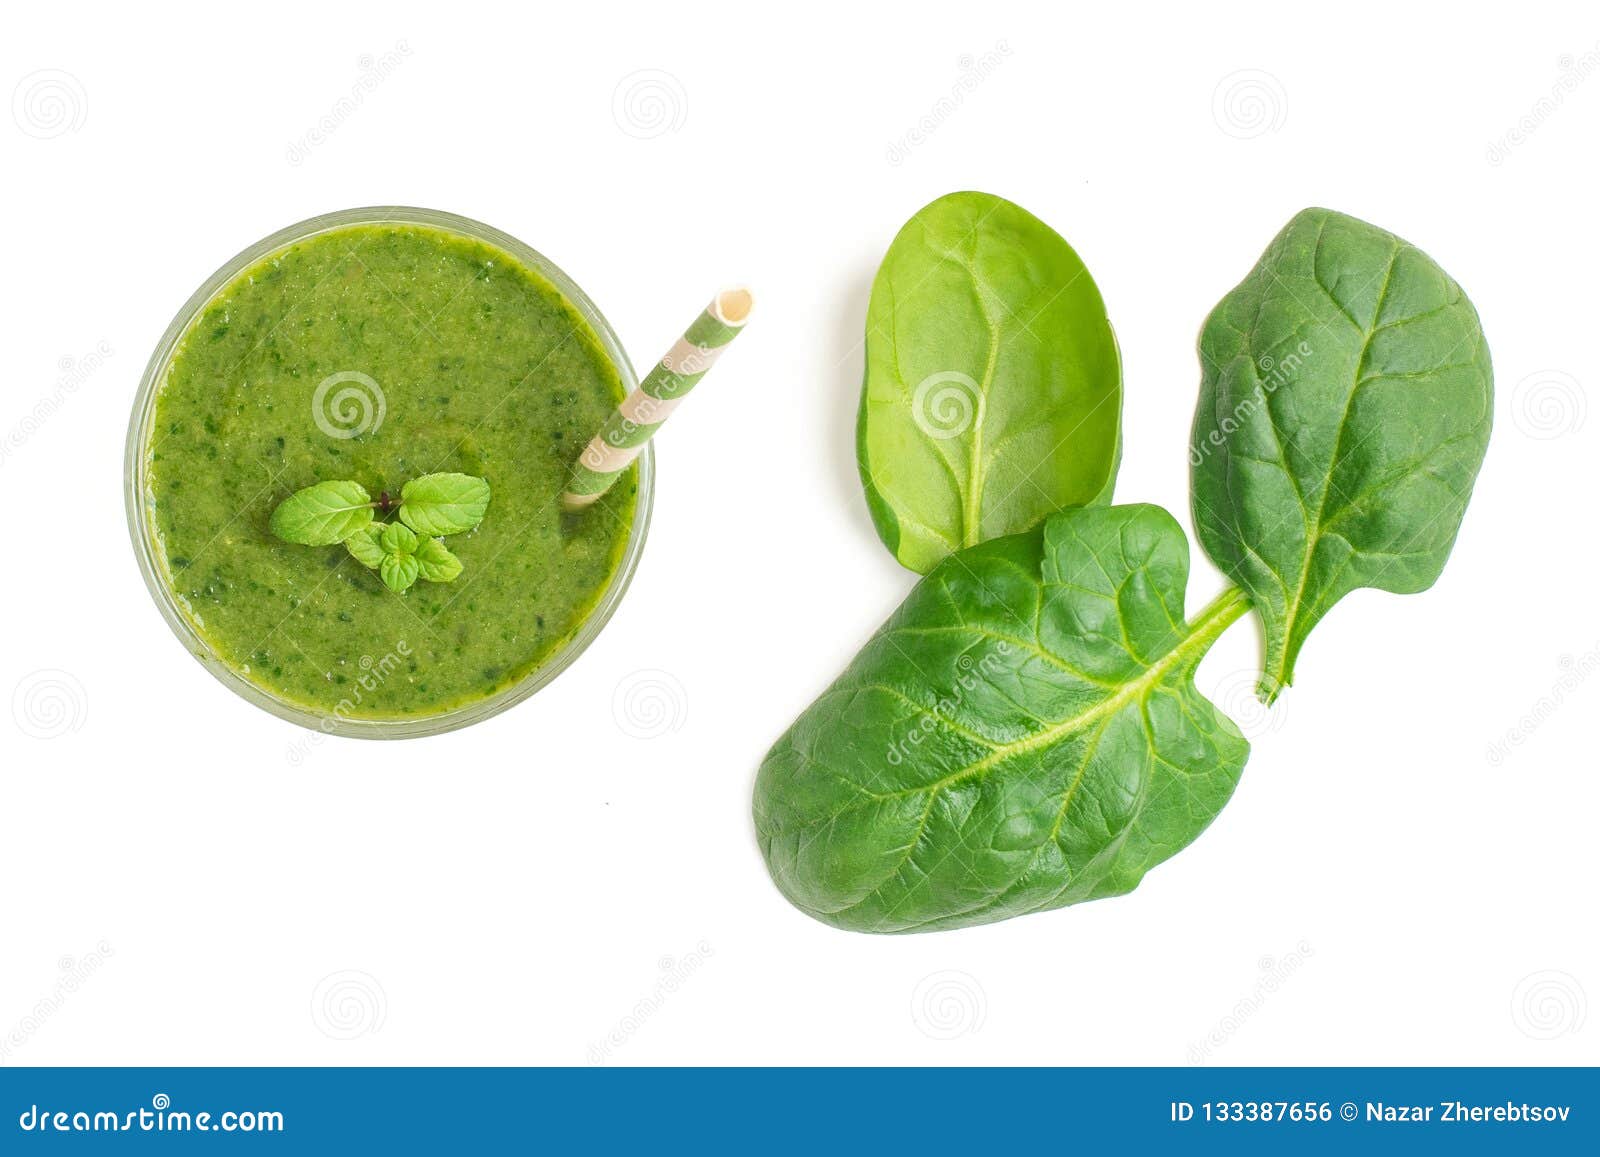 spinach smoothies. healthy green juice iwith spinach leaves solated on white background. top view